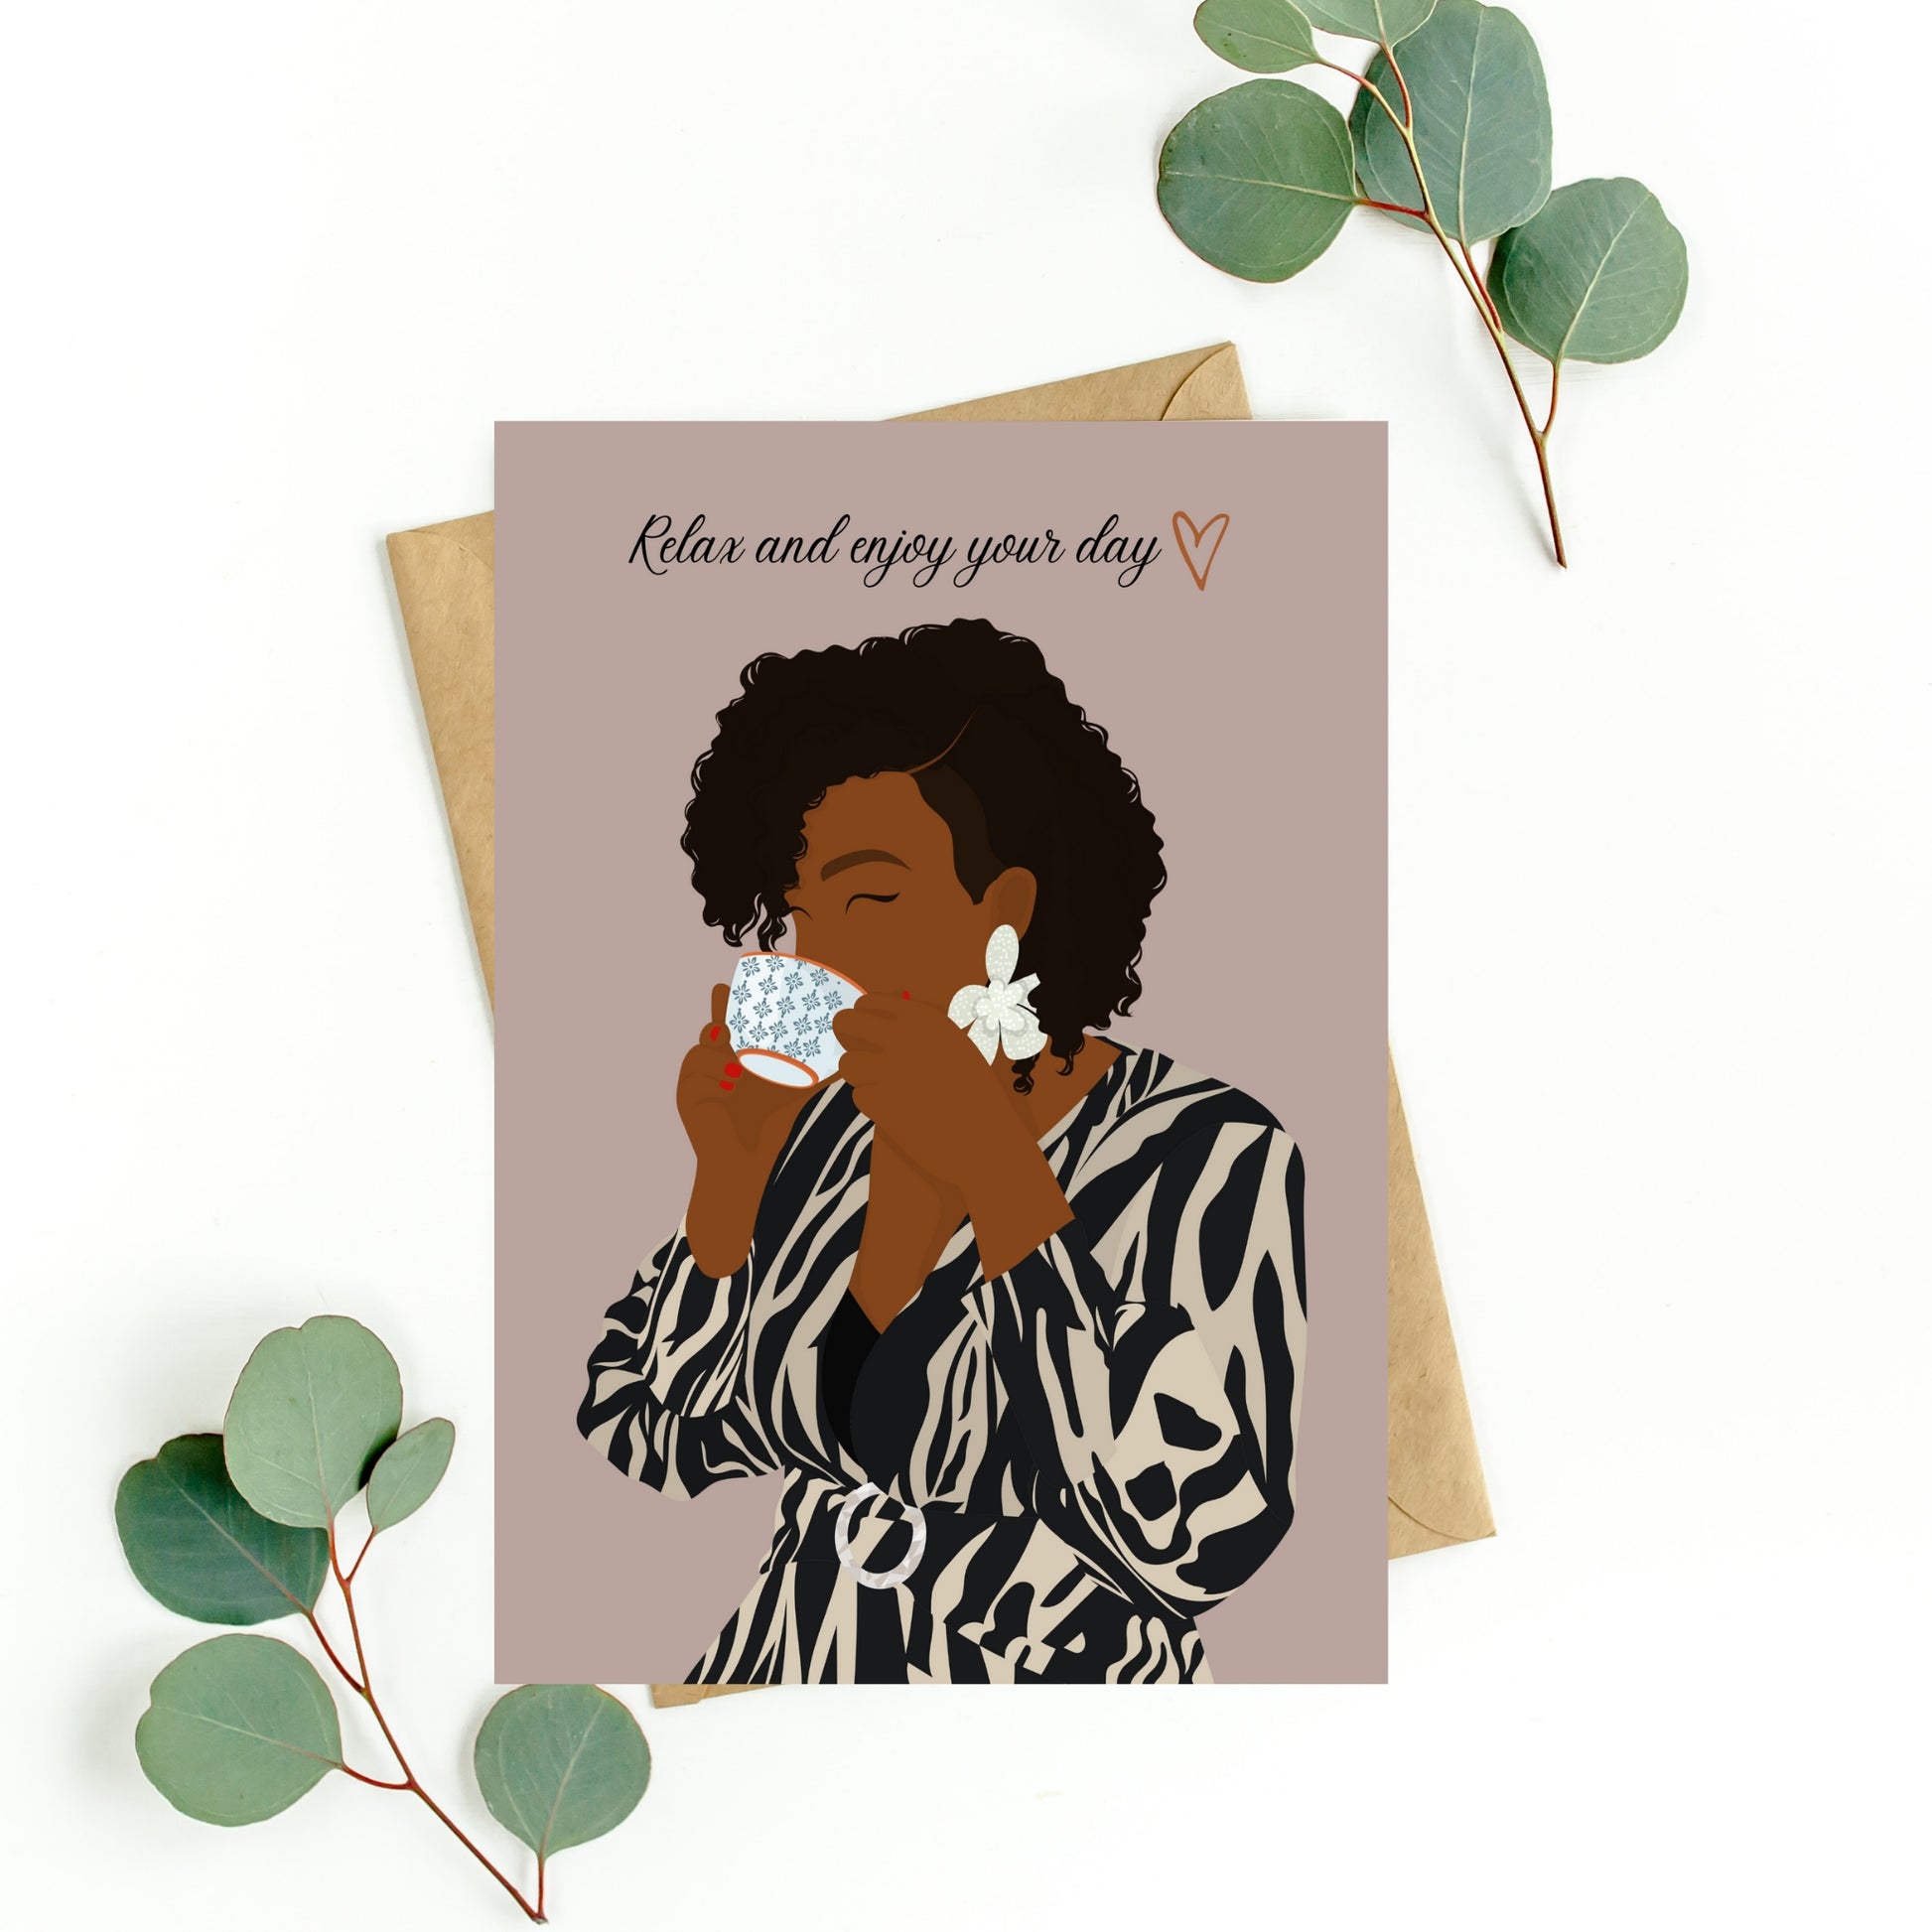 Black woman birthday card. Black greeting cards, black owned cards